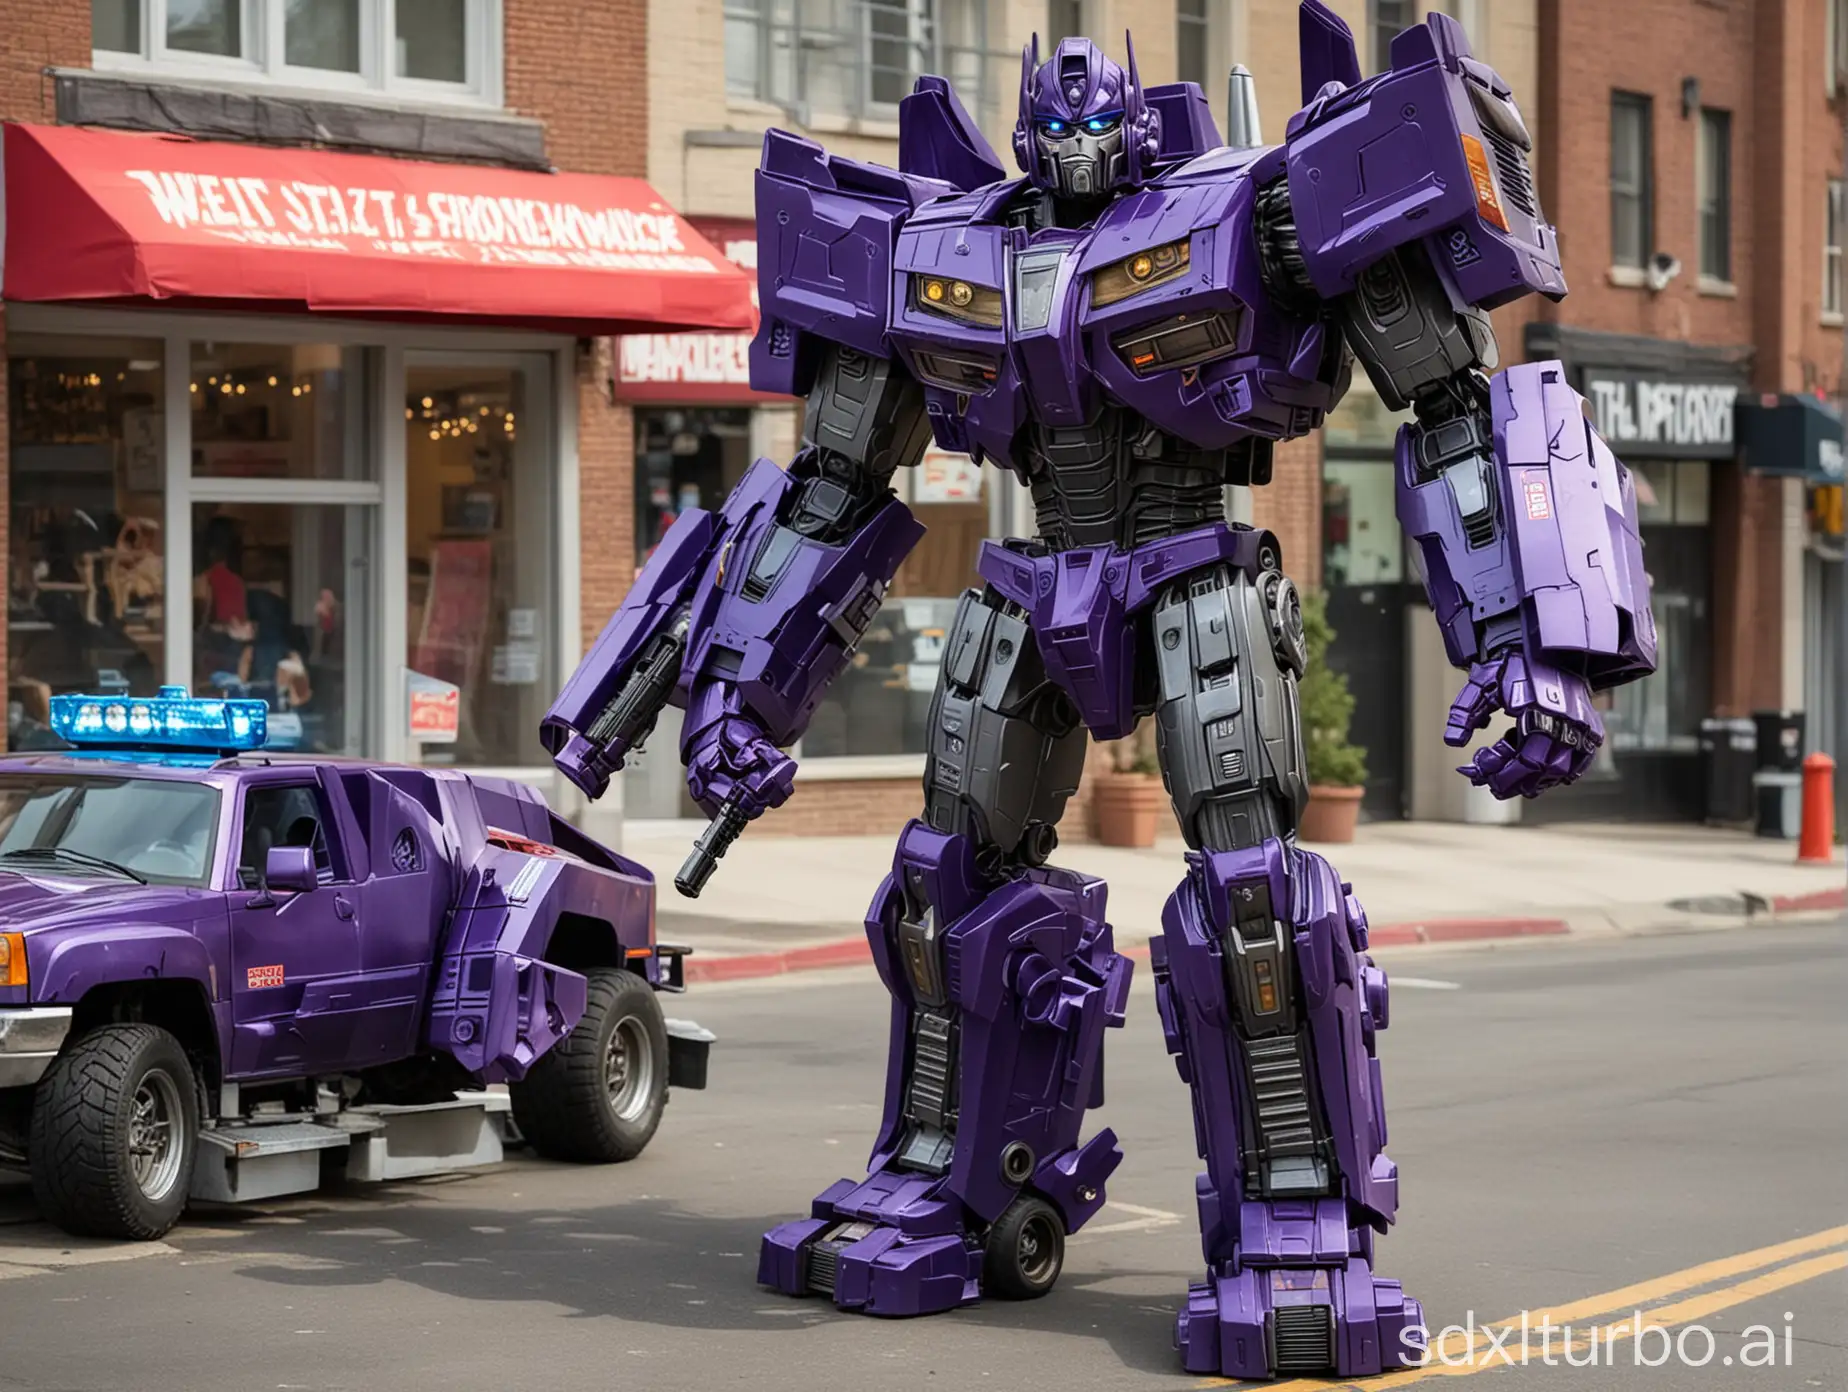 Transformers, the mighty Shockwave, is delivering takeout.